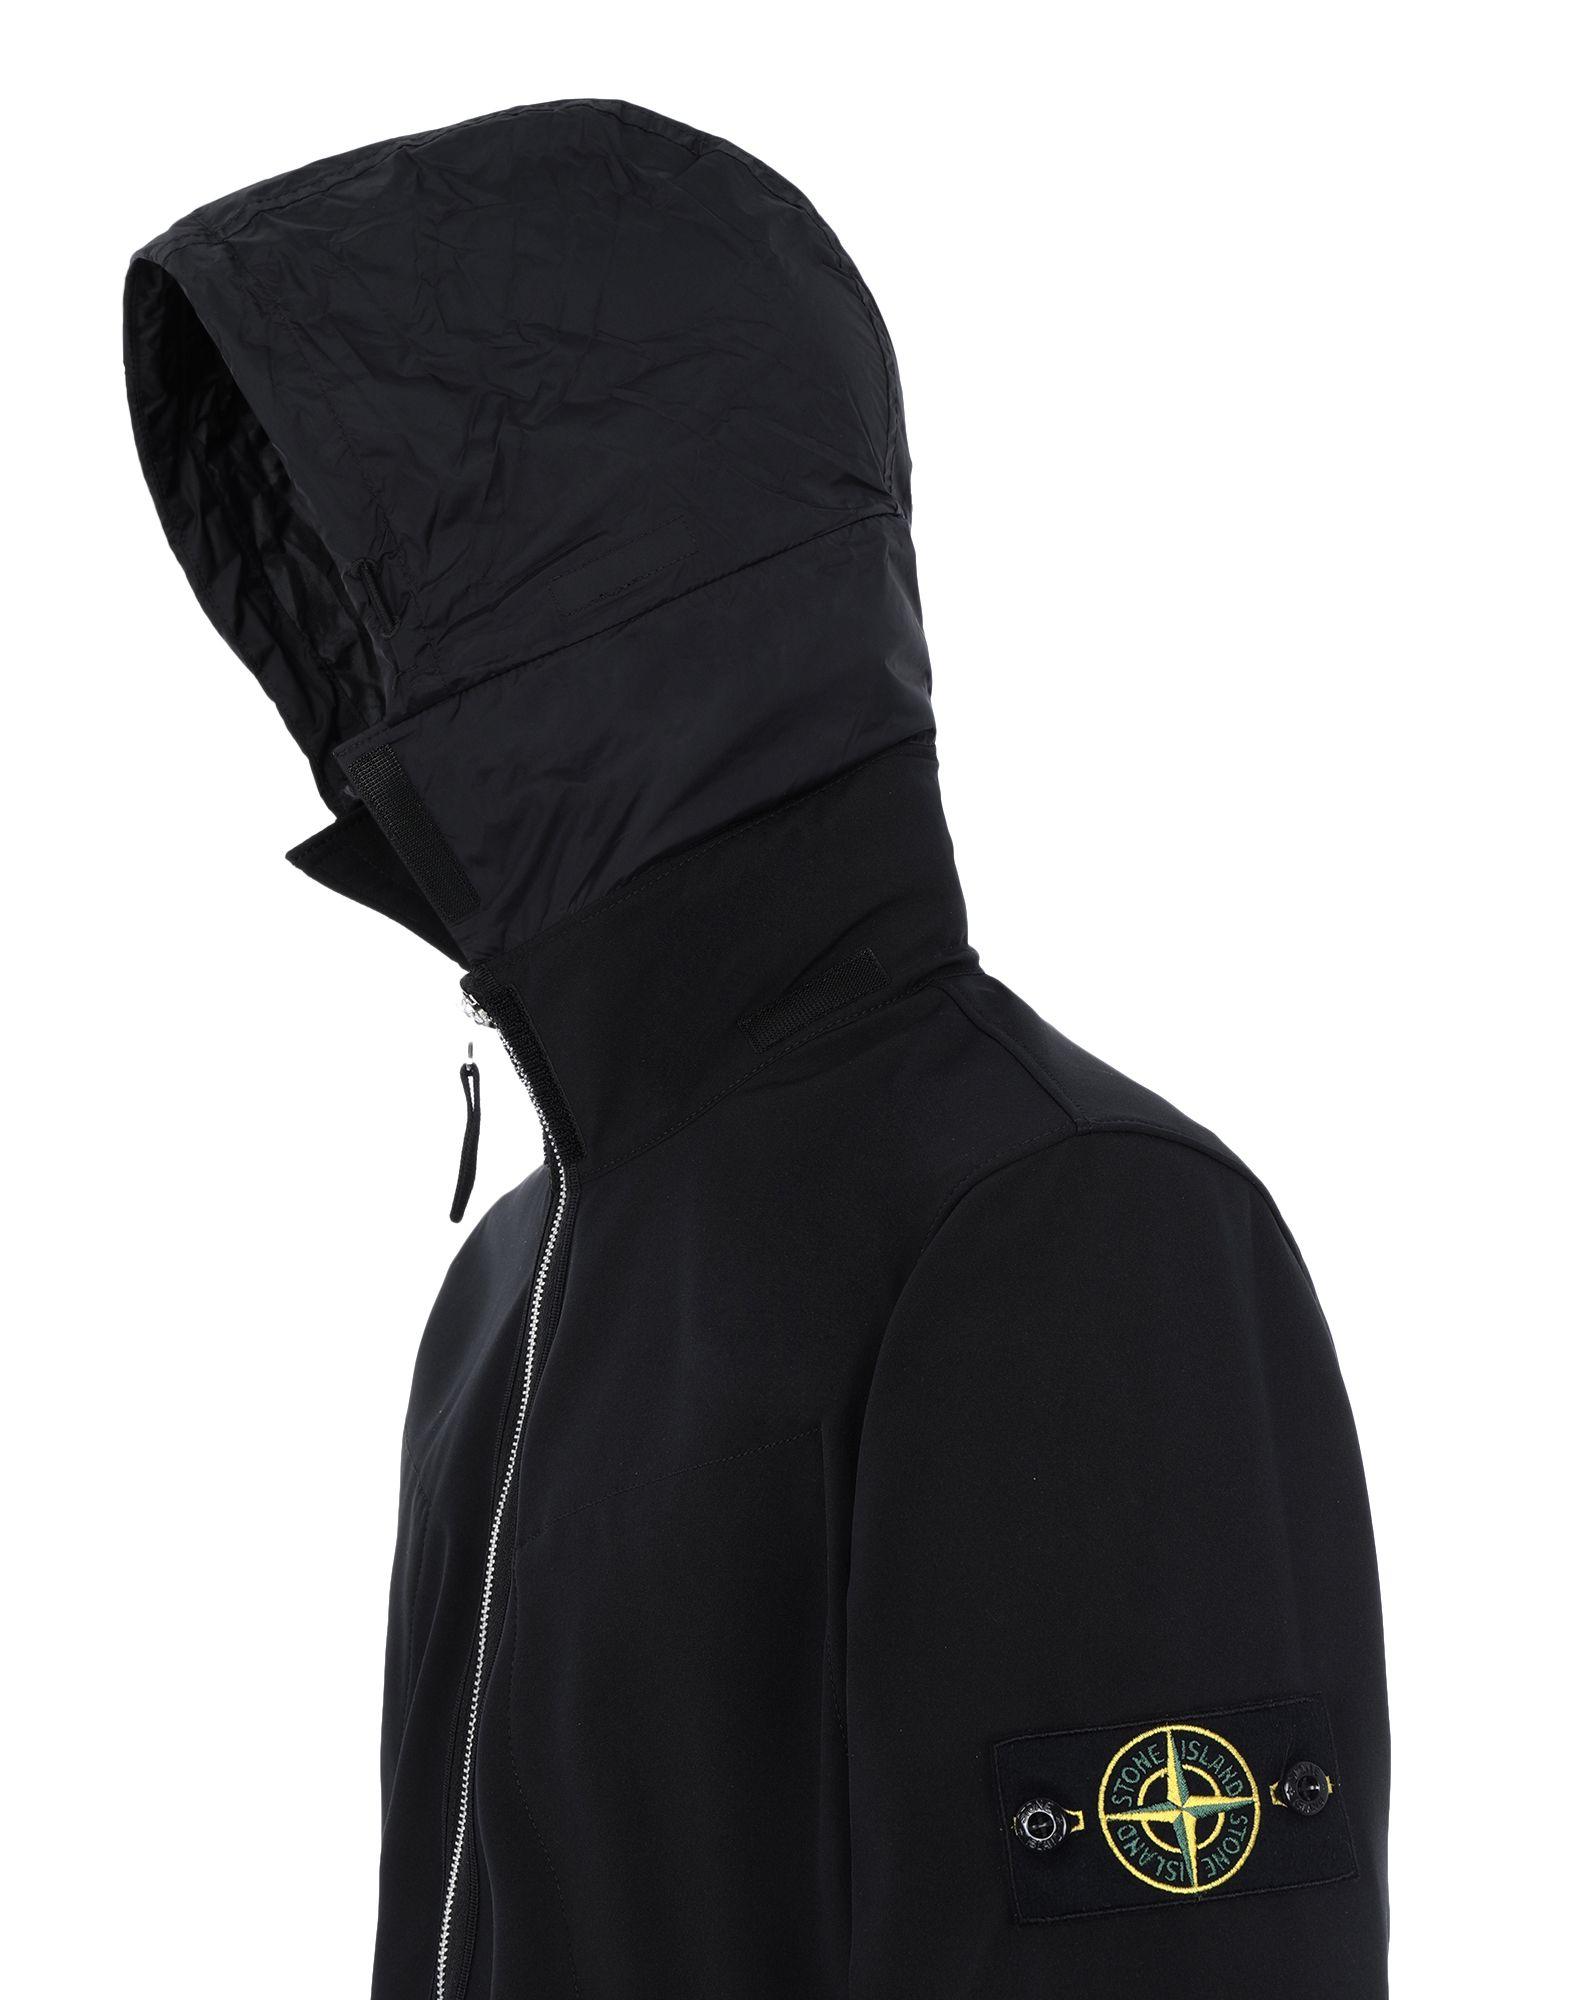 Stone Island Synthetic 43327 Light Soft Shell-r in Black for Men - Lyst